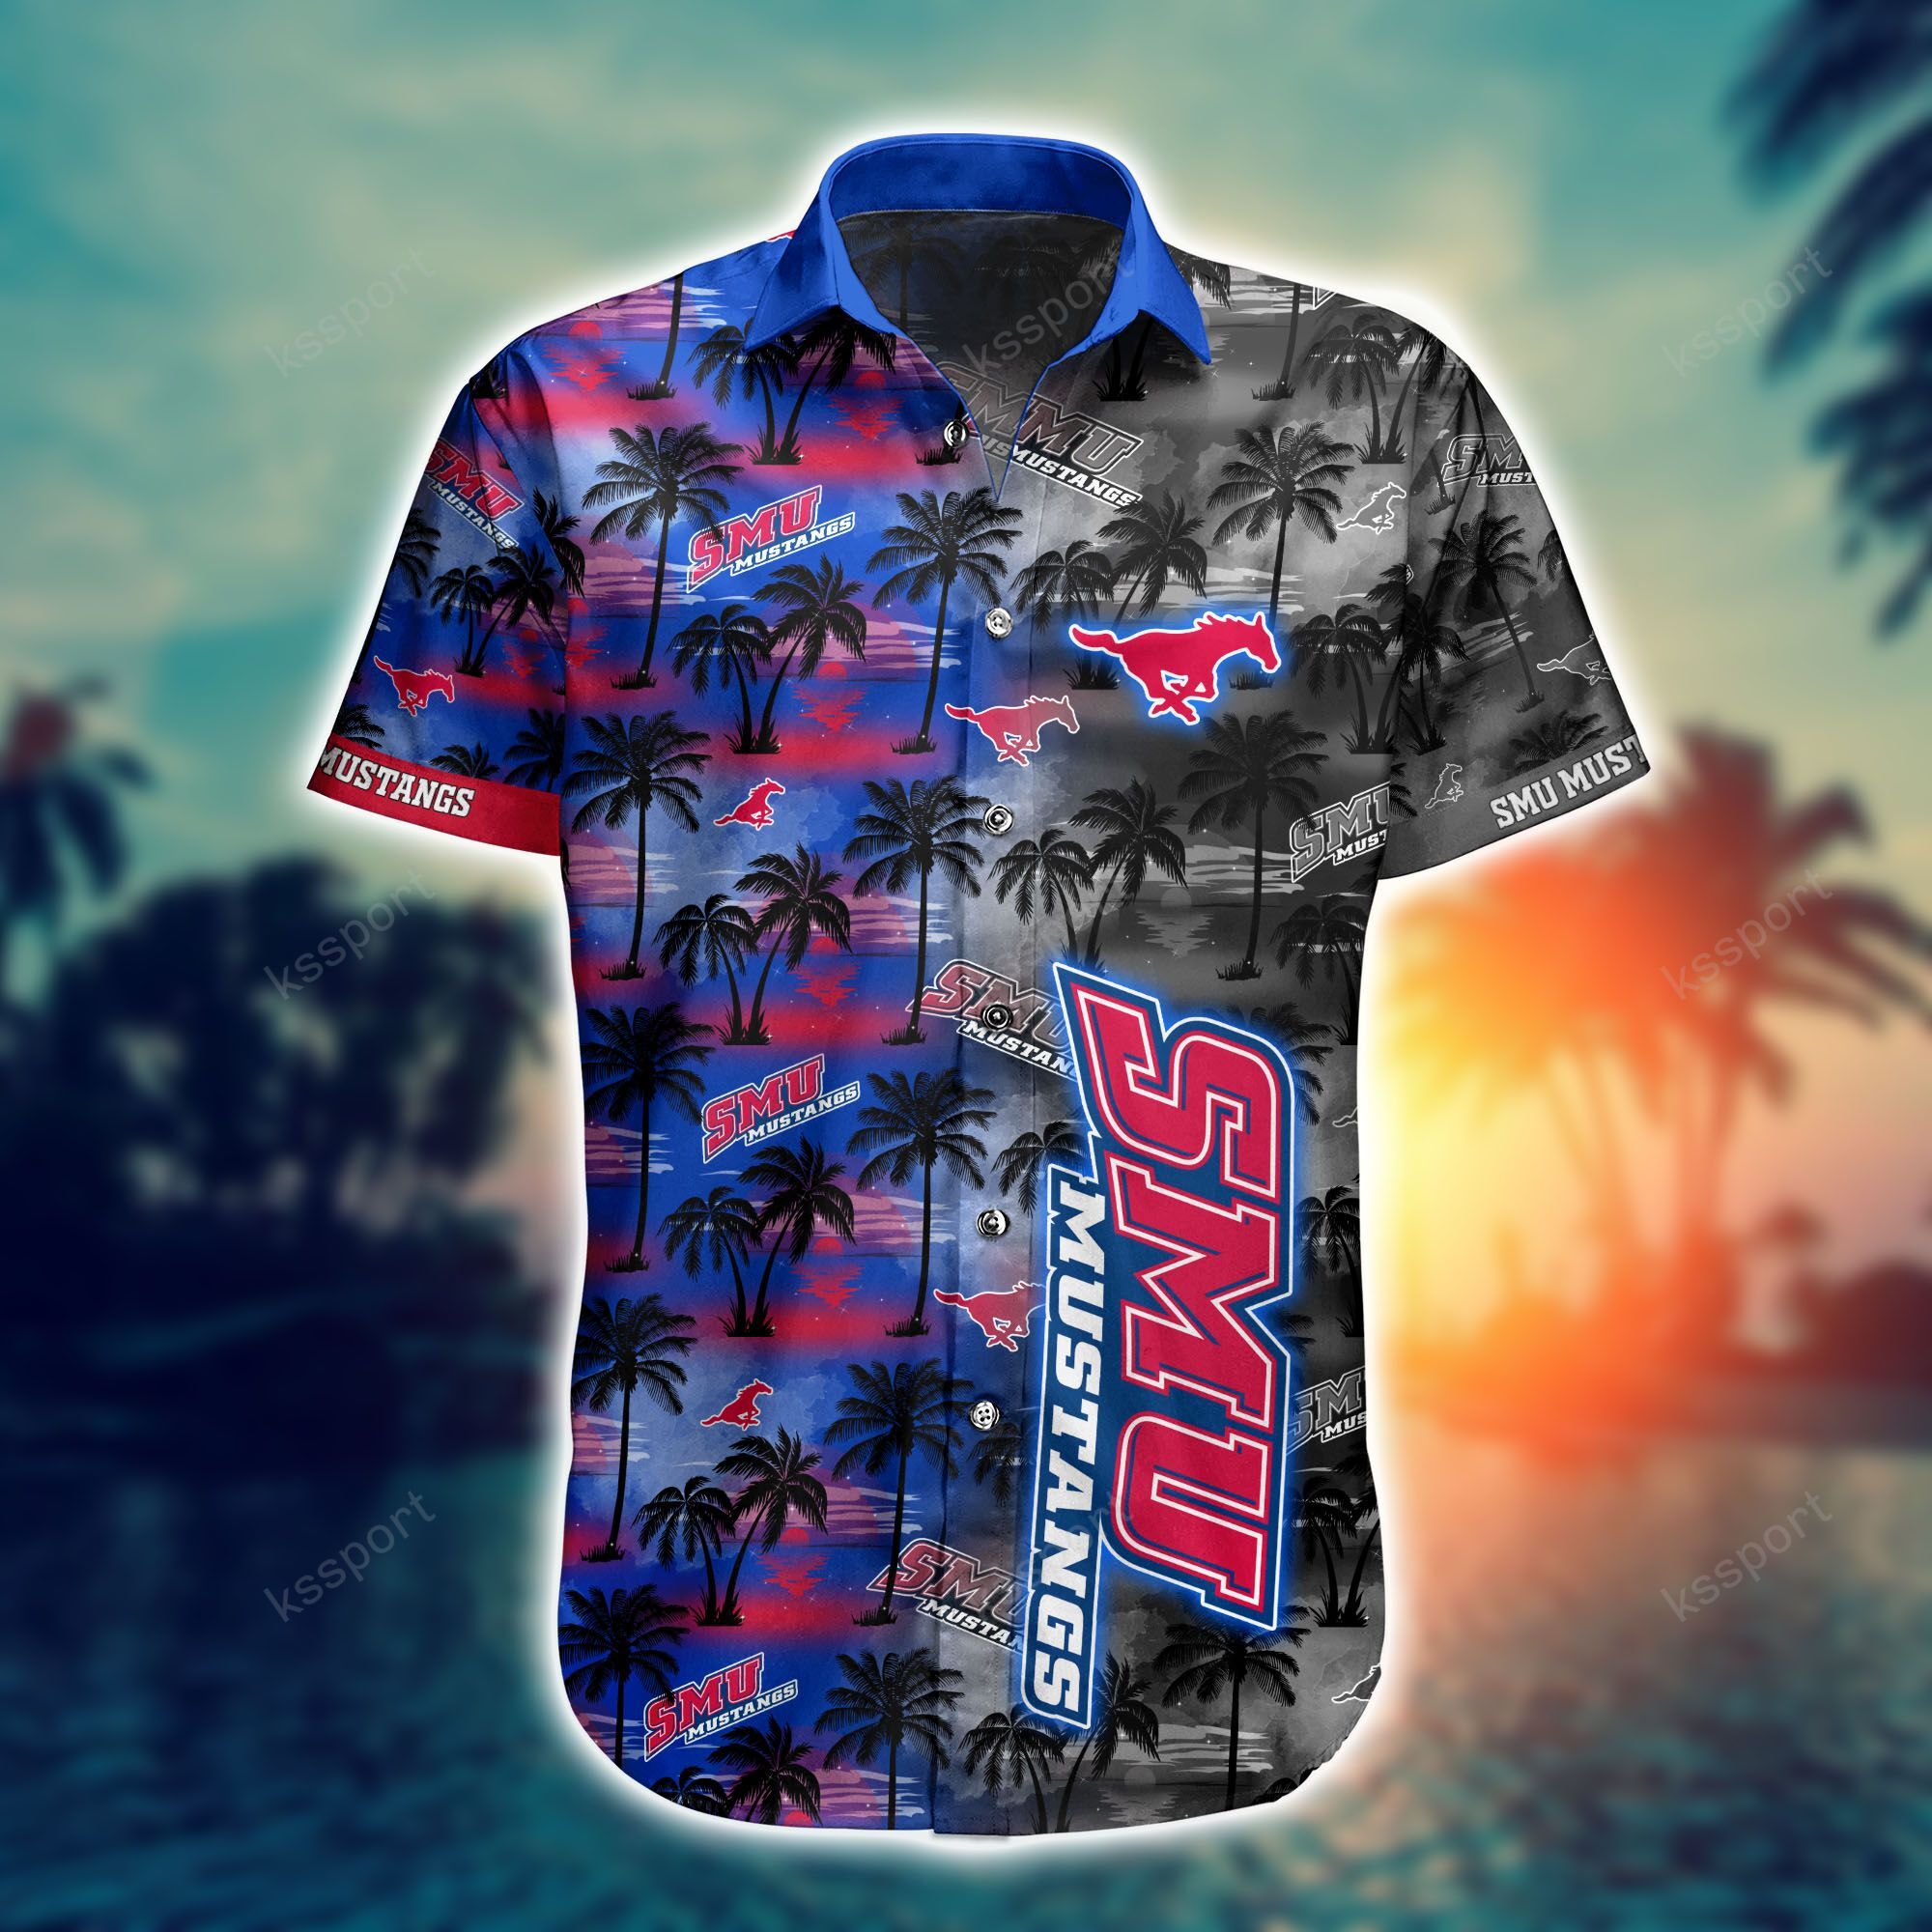 Top cool Hawaiian shirt 2022 - Make sure you get yours today before they run out! 170